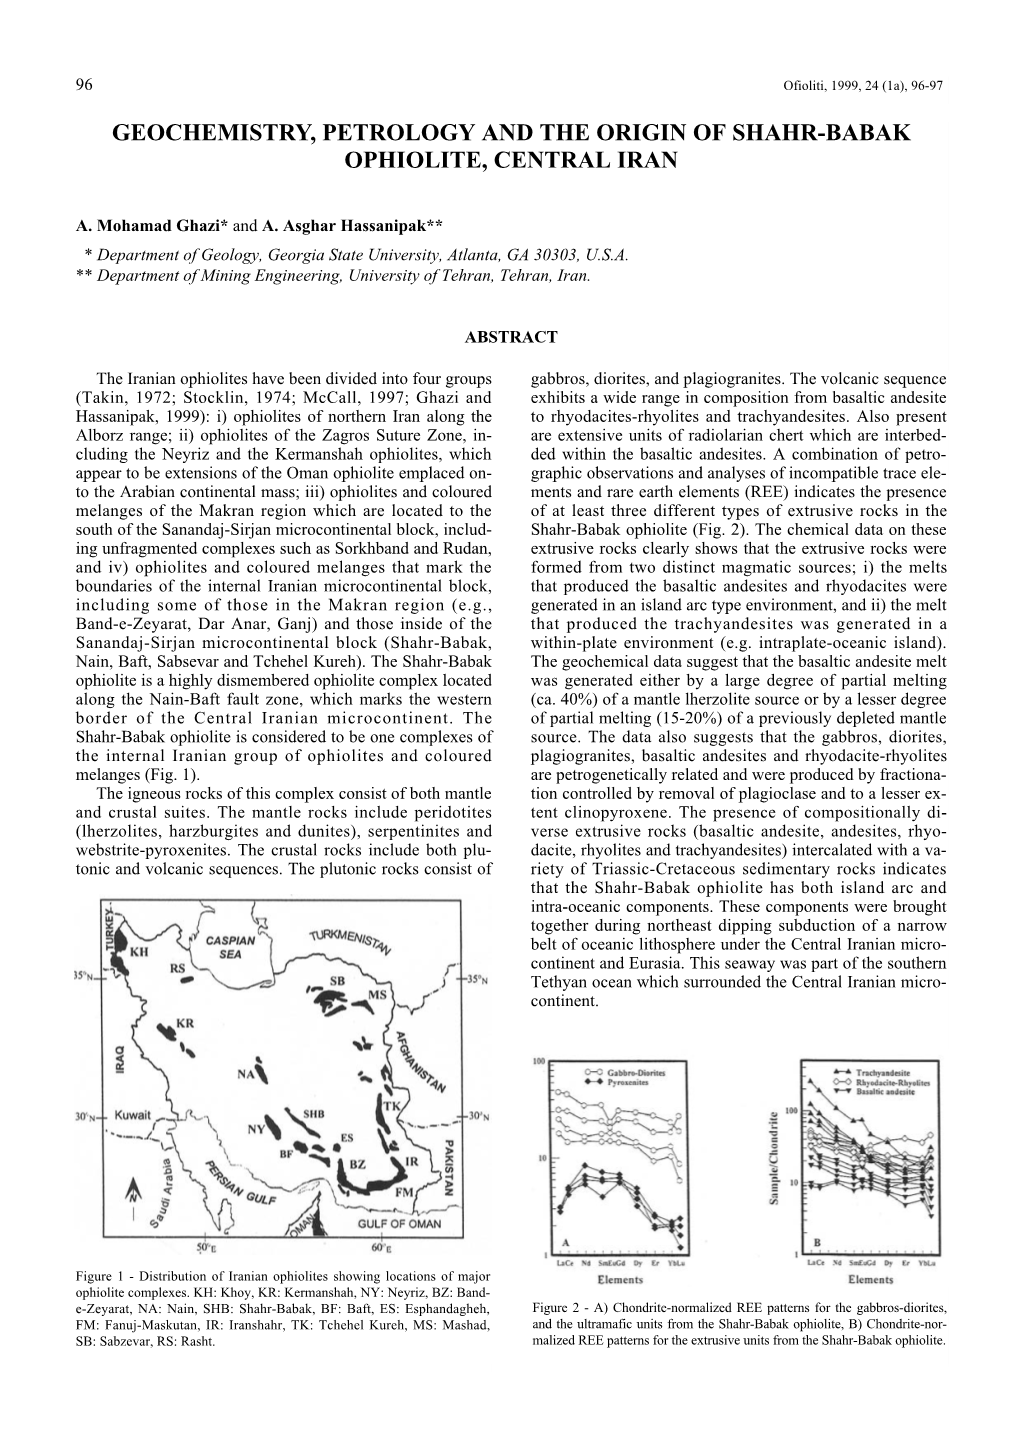 Geochemistry, Petrology and the Origin of Shahr-Babak Ophiolite, Central Iran